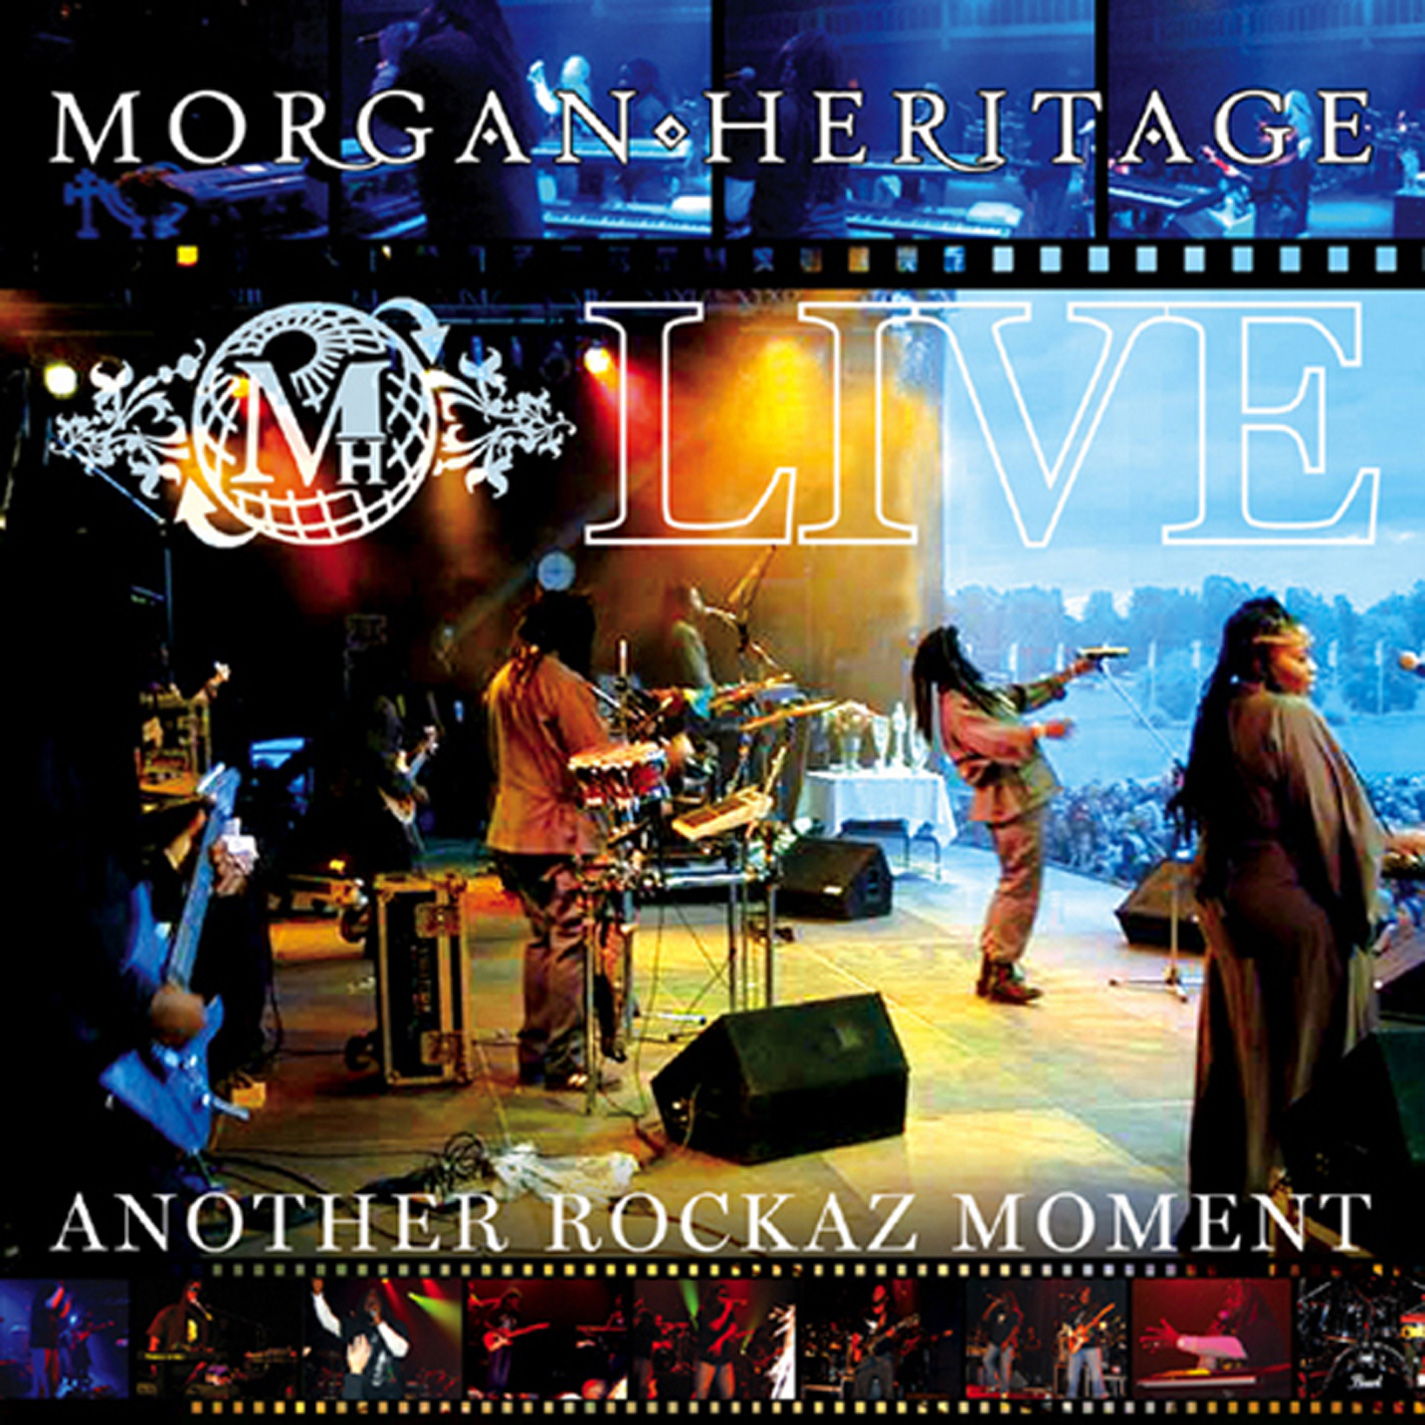 Morgan Heritage – Live Another Rockaz Moment